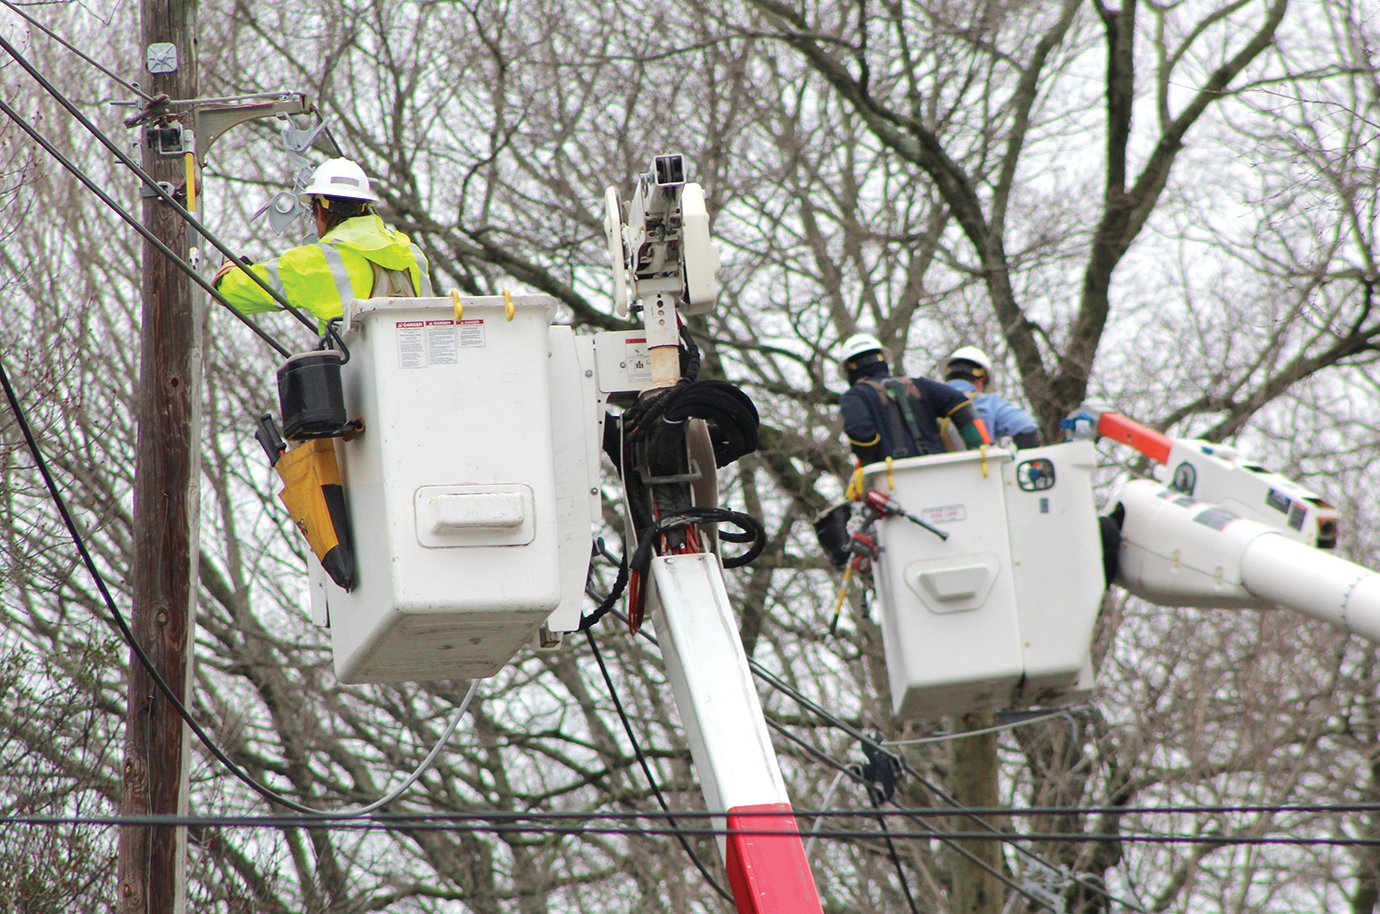 CELP Manager Phillip Goode said five spans of power lines were taken out by a single tree Tuesday morning.